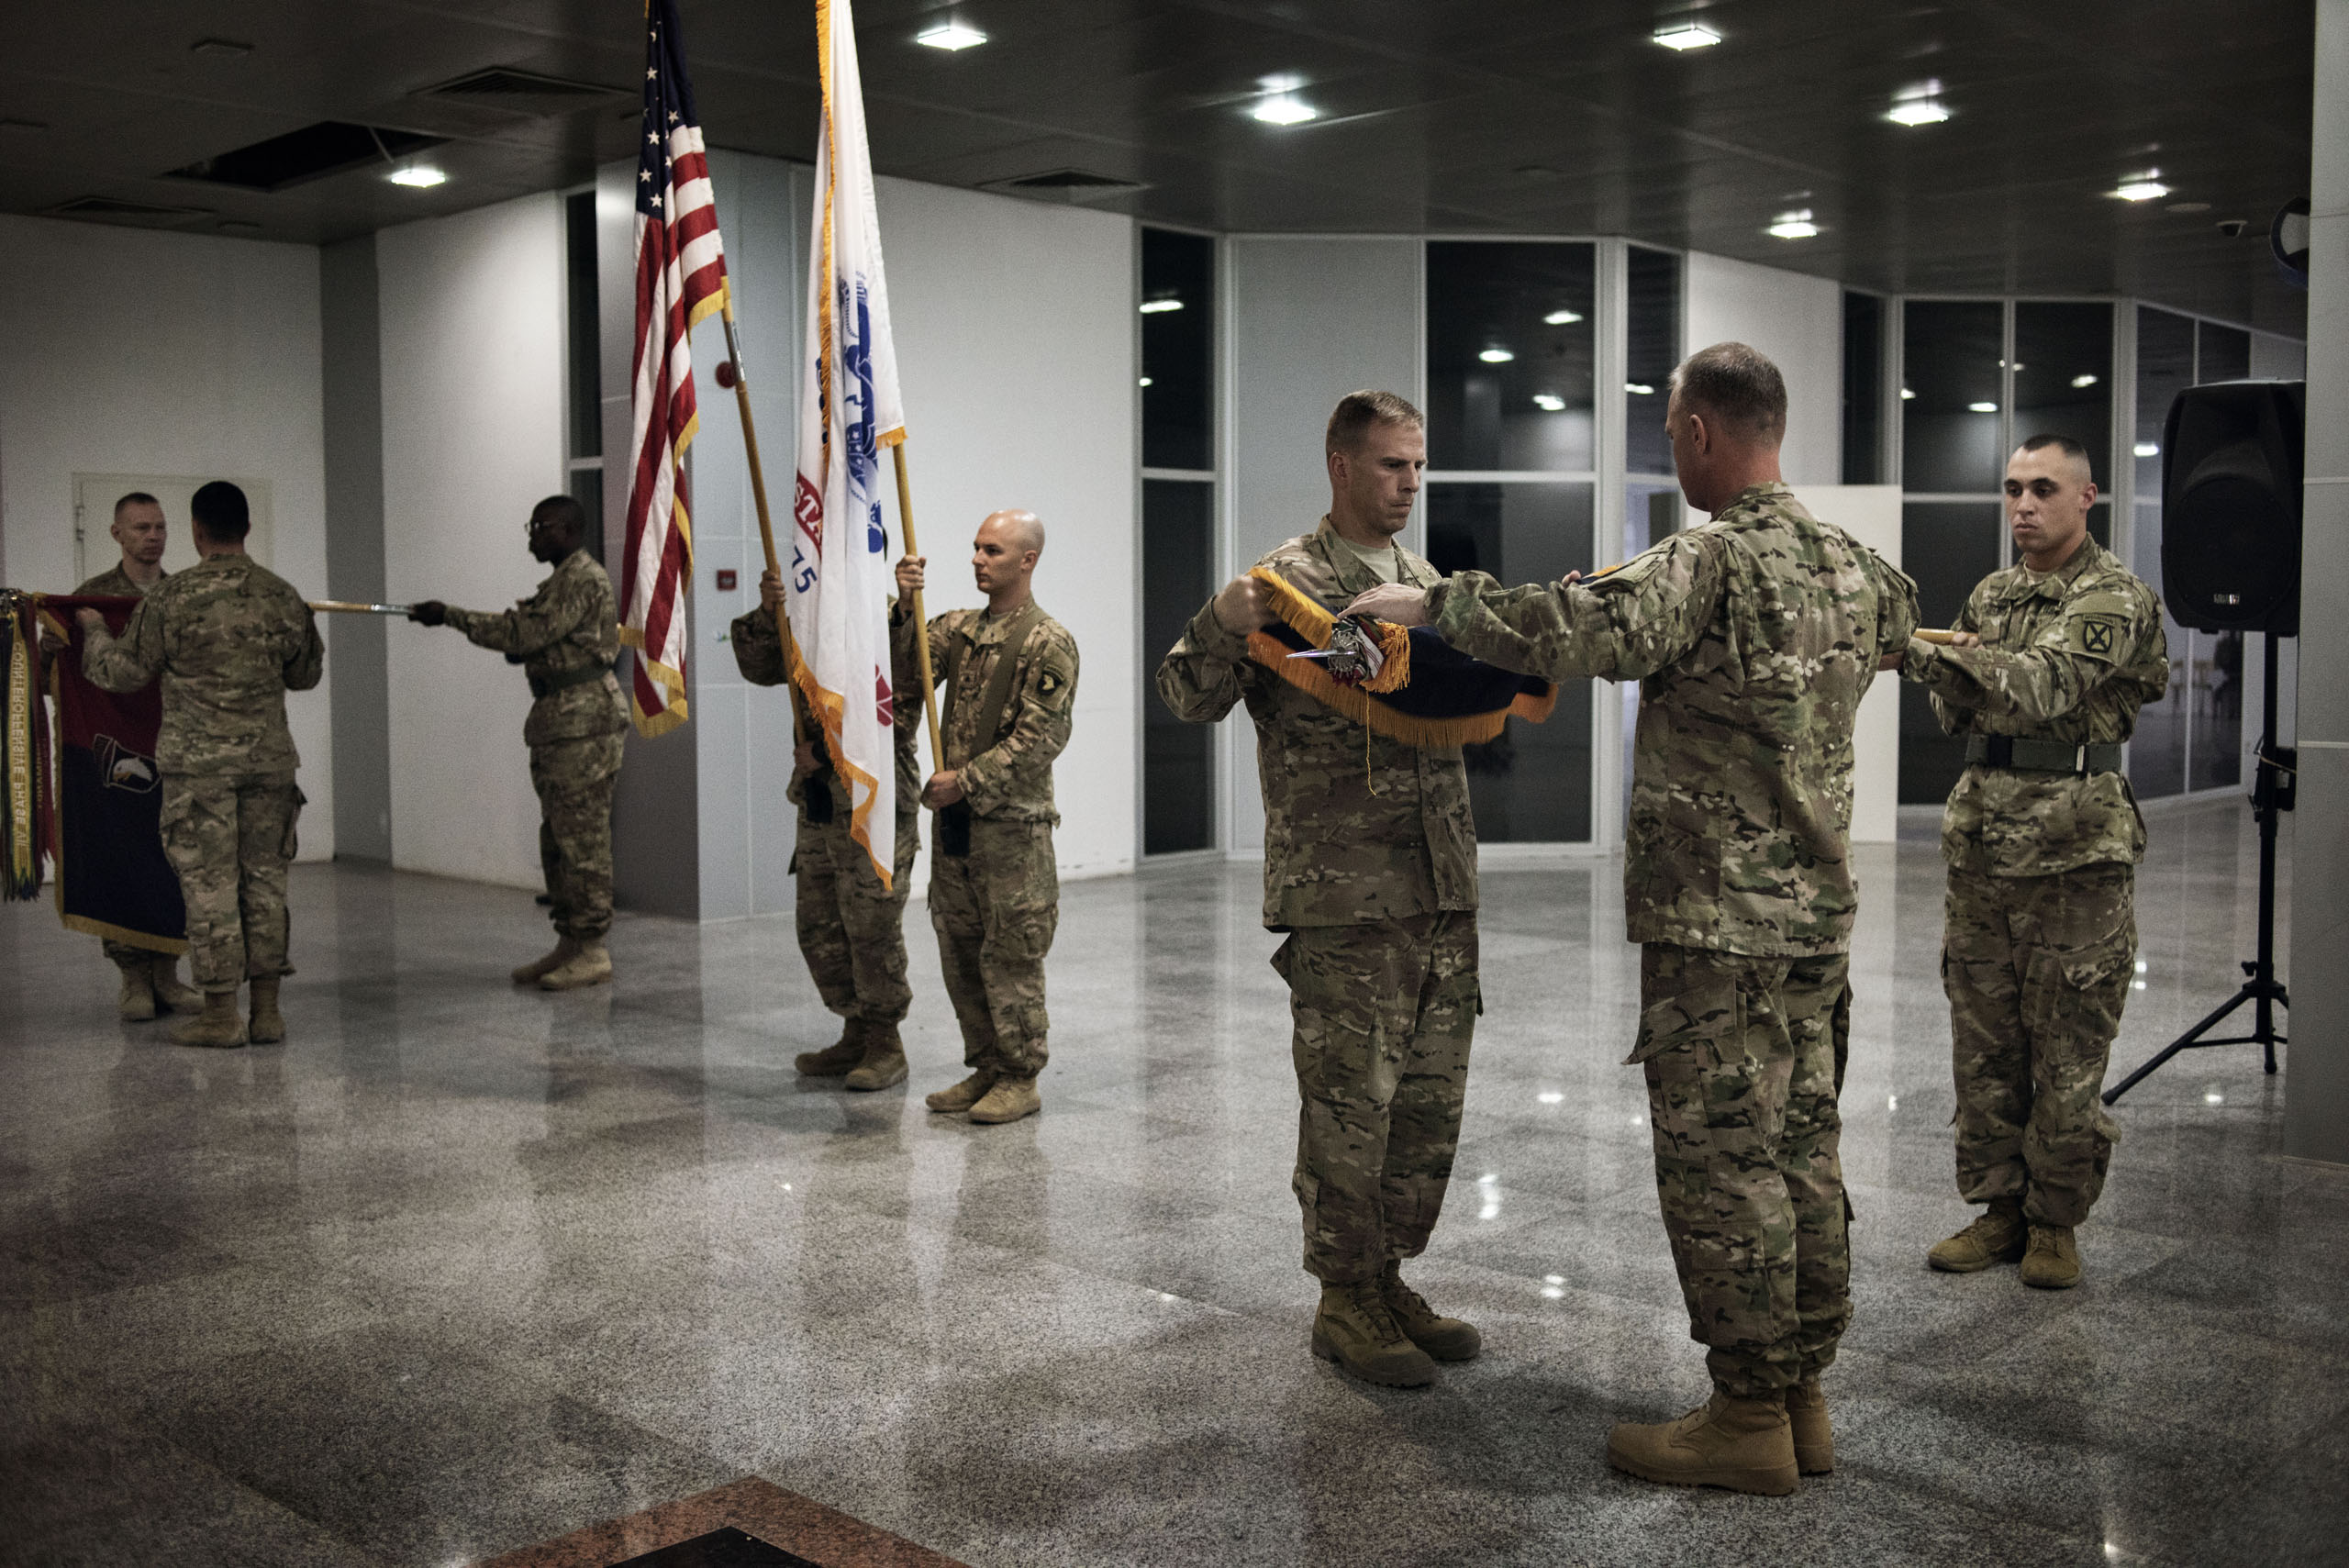 U.S. Officers and soldiers from the U.S. military, Iraqi armed forces, and Kurdish forces, participate in a U.S. transfer of authority ceremony in Erbil, in  northern Iraq's semi-autonomous Kurdish region, May 17, 2016.